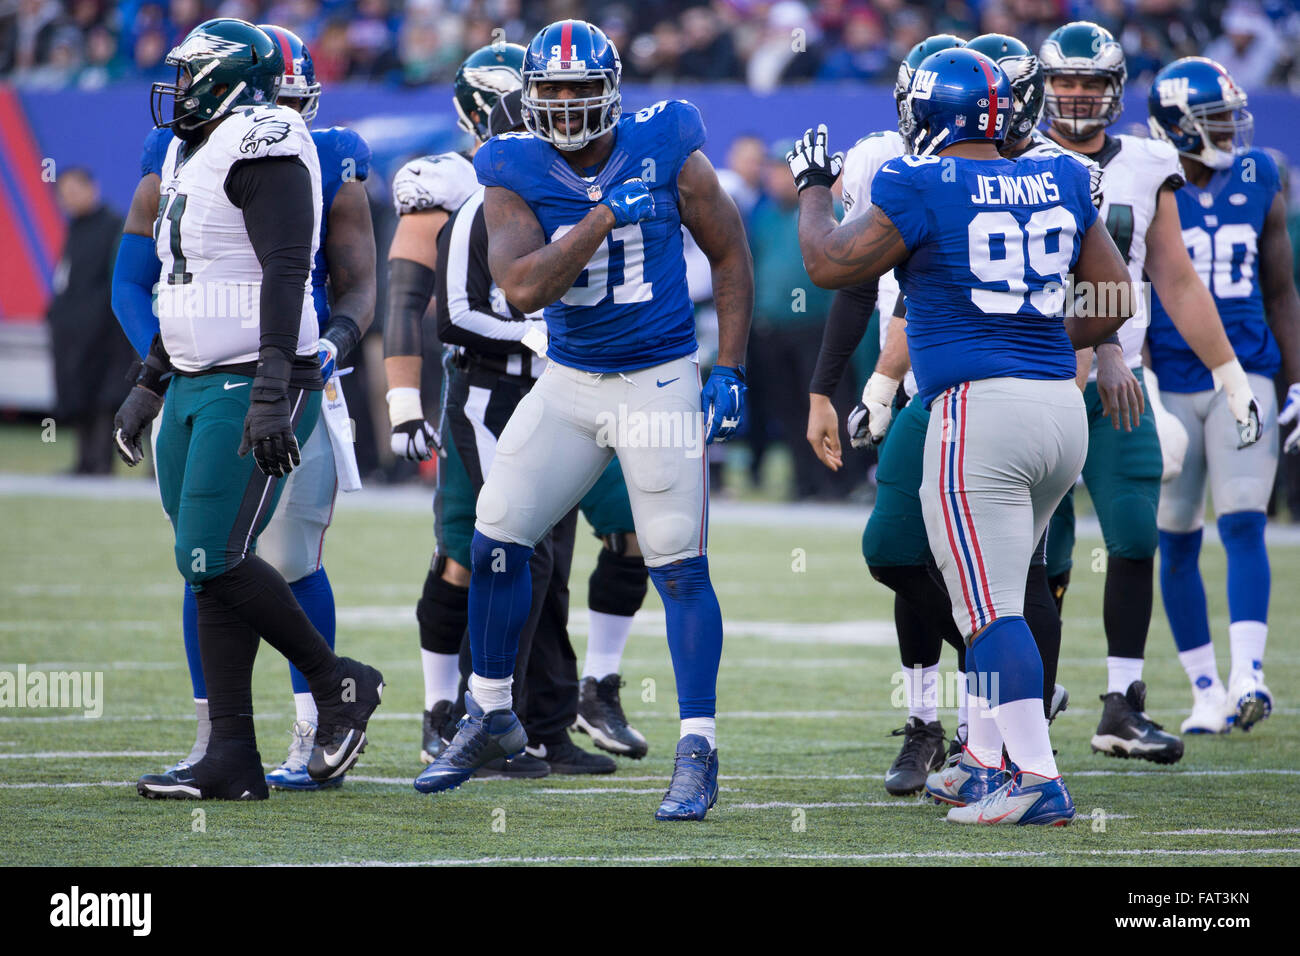 East Rutherford, New Jersey, USA. 3rd Jan, 2016. New York Giants defensive end Robert Ayers (91) reacts to his sack during the NFL game between the Philadelphia Eagles and the New York Giants at MetLife Stadium in East Rutherford, New Jersey. The Philadelphia Eagles won 35-30. Christopher Szagola/CSM/Alamy Live News Stock Photo